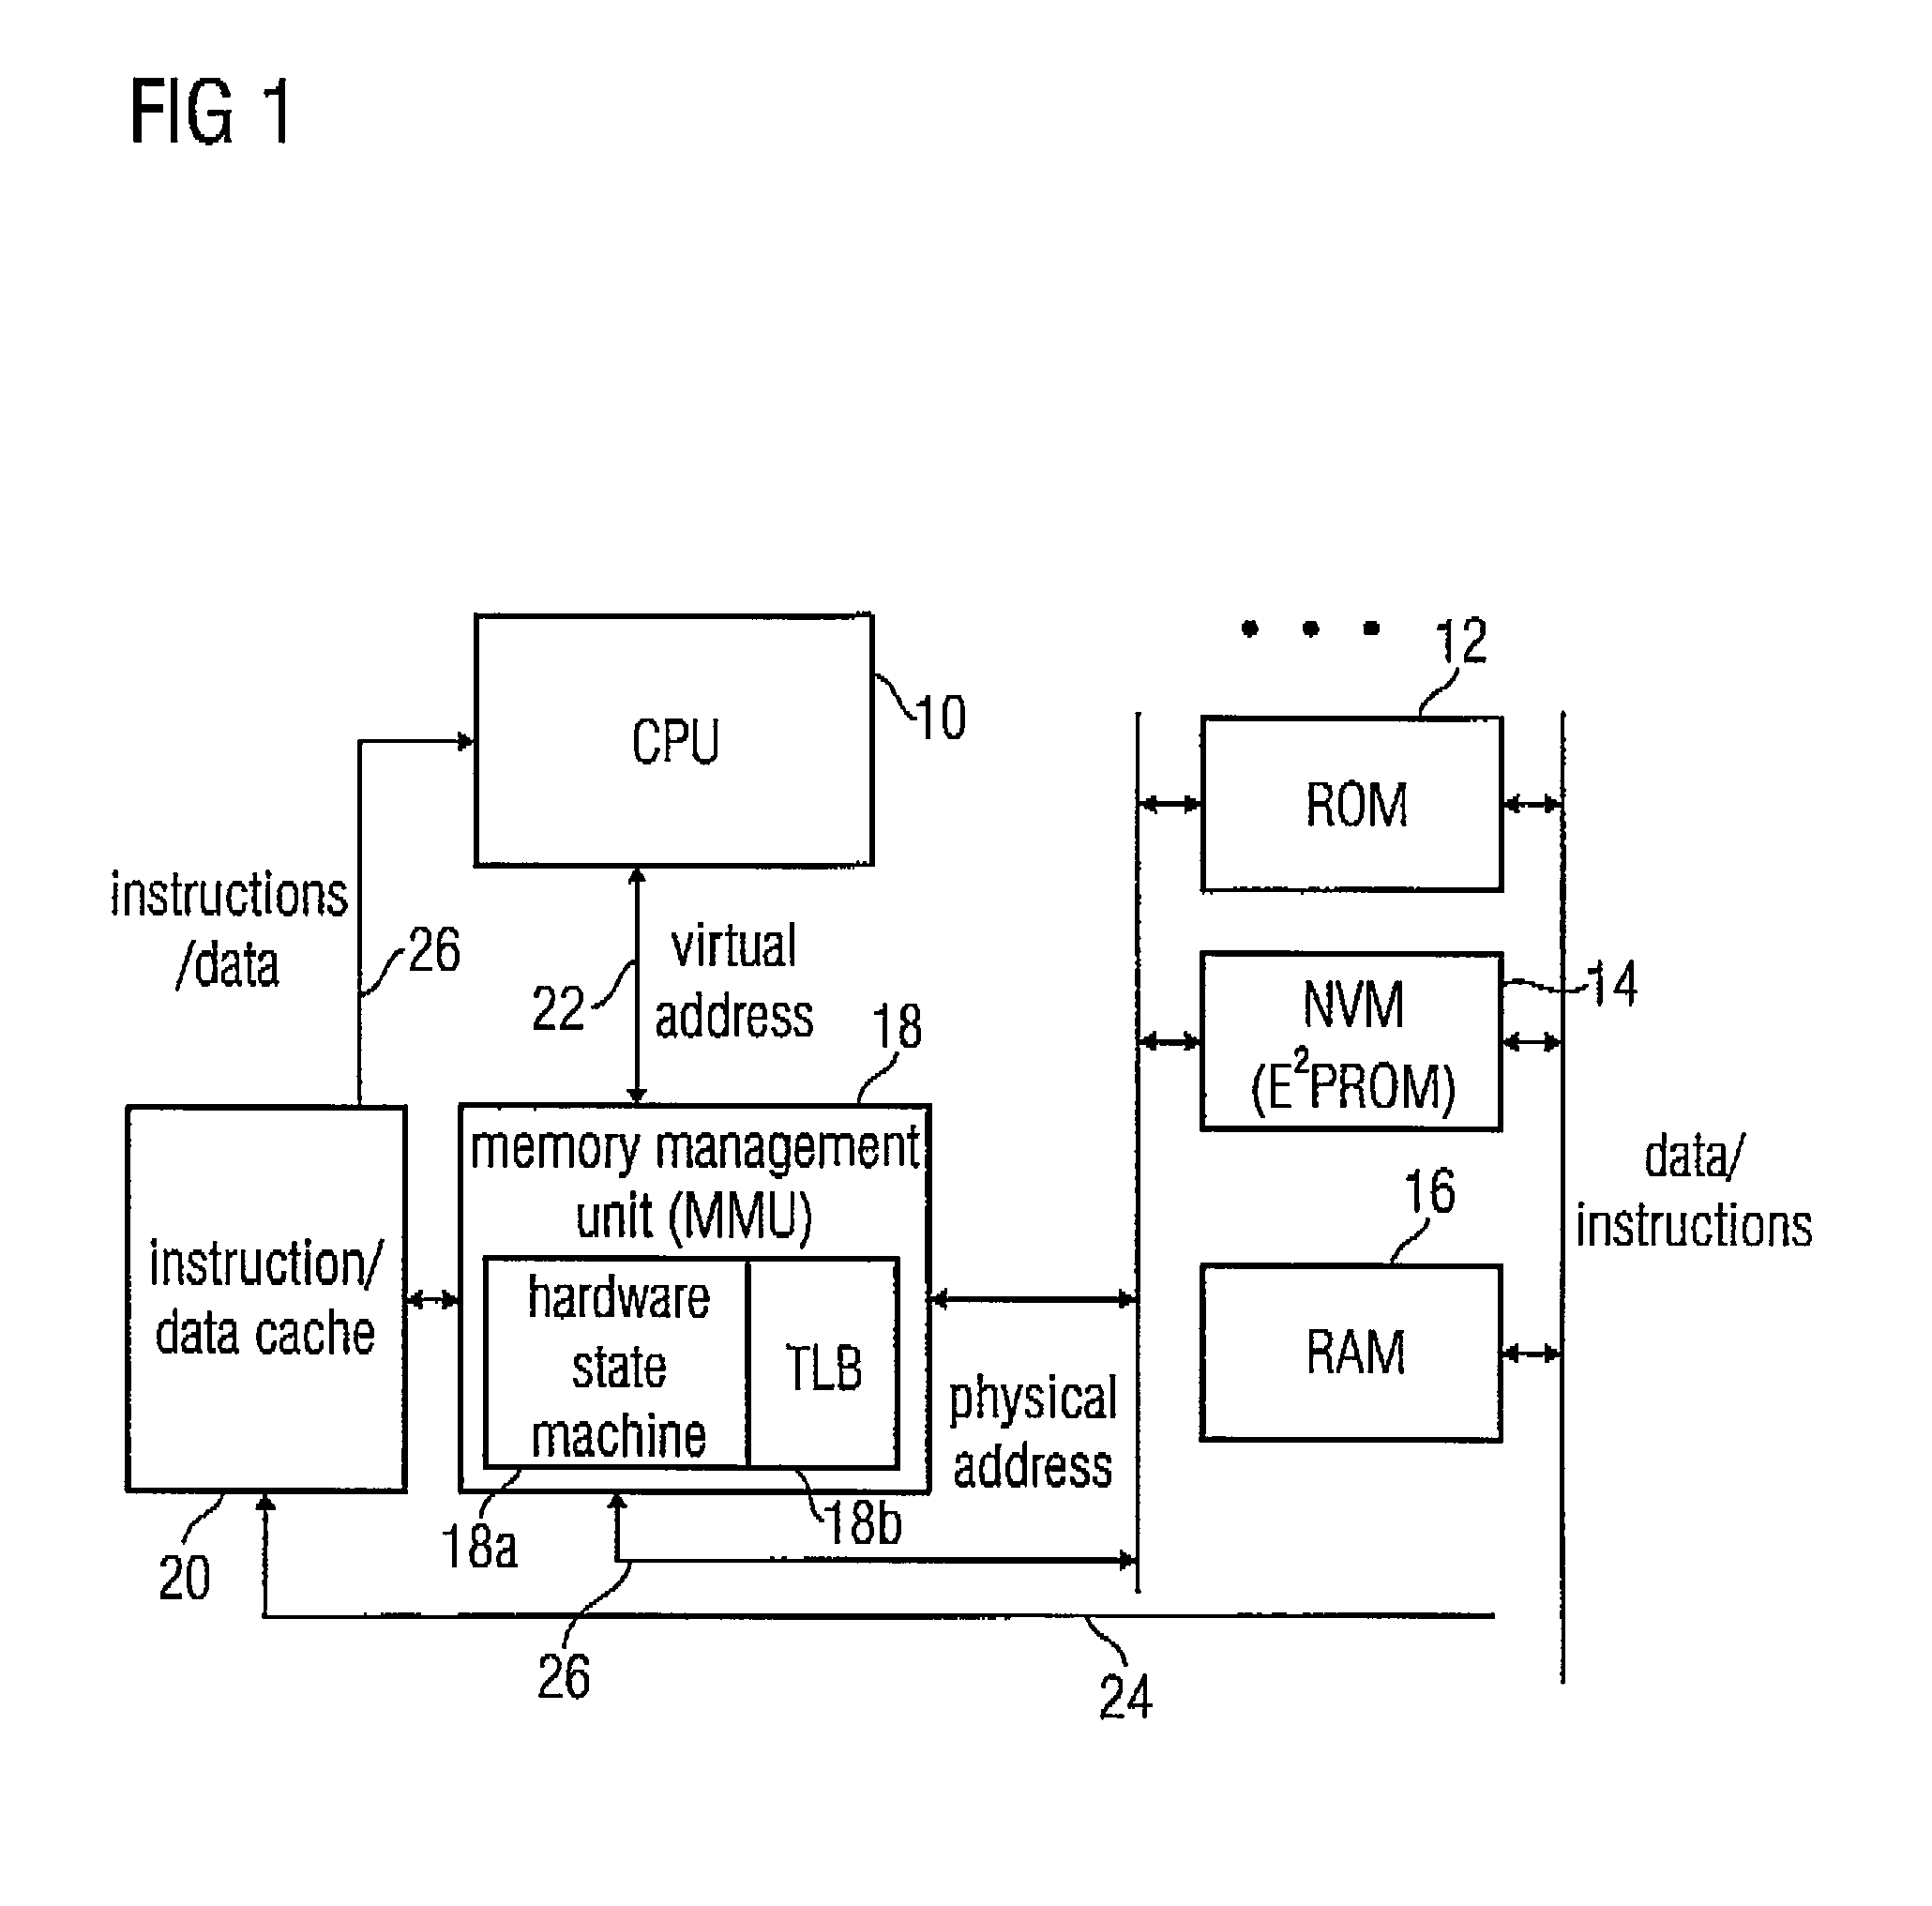 Apparatus and method for determining a physical address from a virtual address by using a hierarchical mapping regulation with compressed nodes